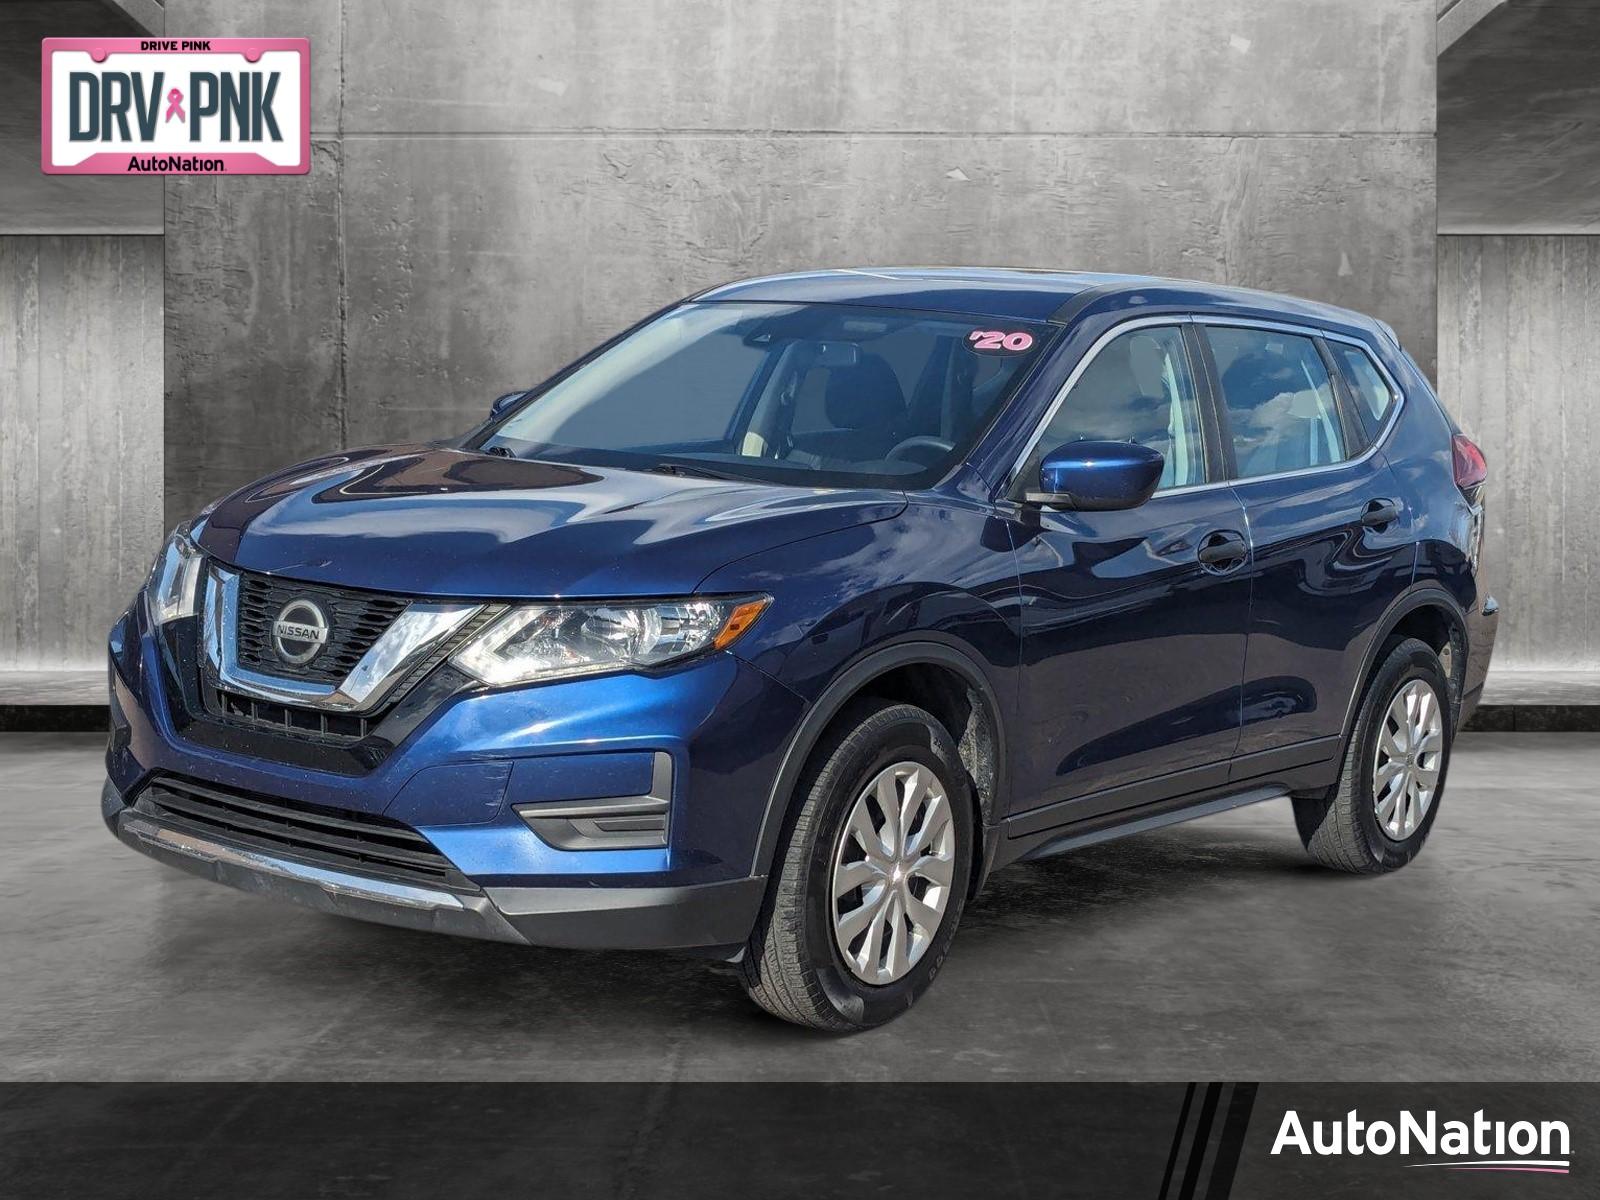 2020 Nissan Rogue Vehicle Photo in LONE TREE, CO 80124-2750